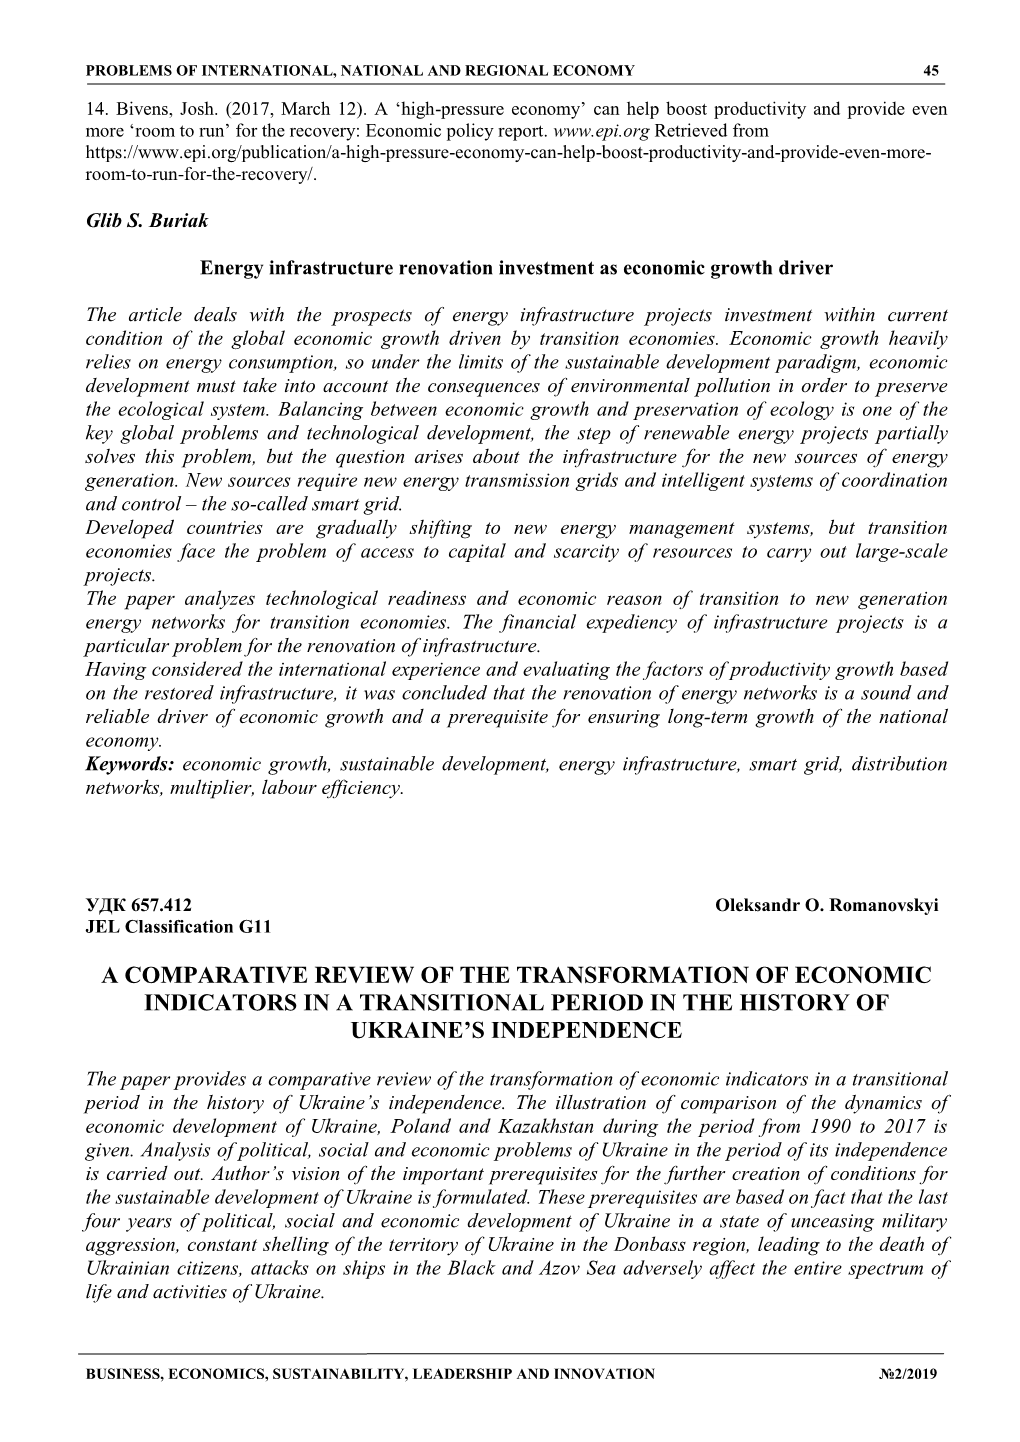 A Comparative Review of the Transformation of Economic Indicators in a Transitional Period in the History of Ukraine’S Independence